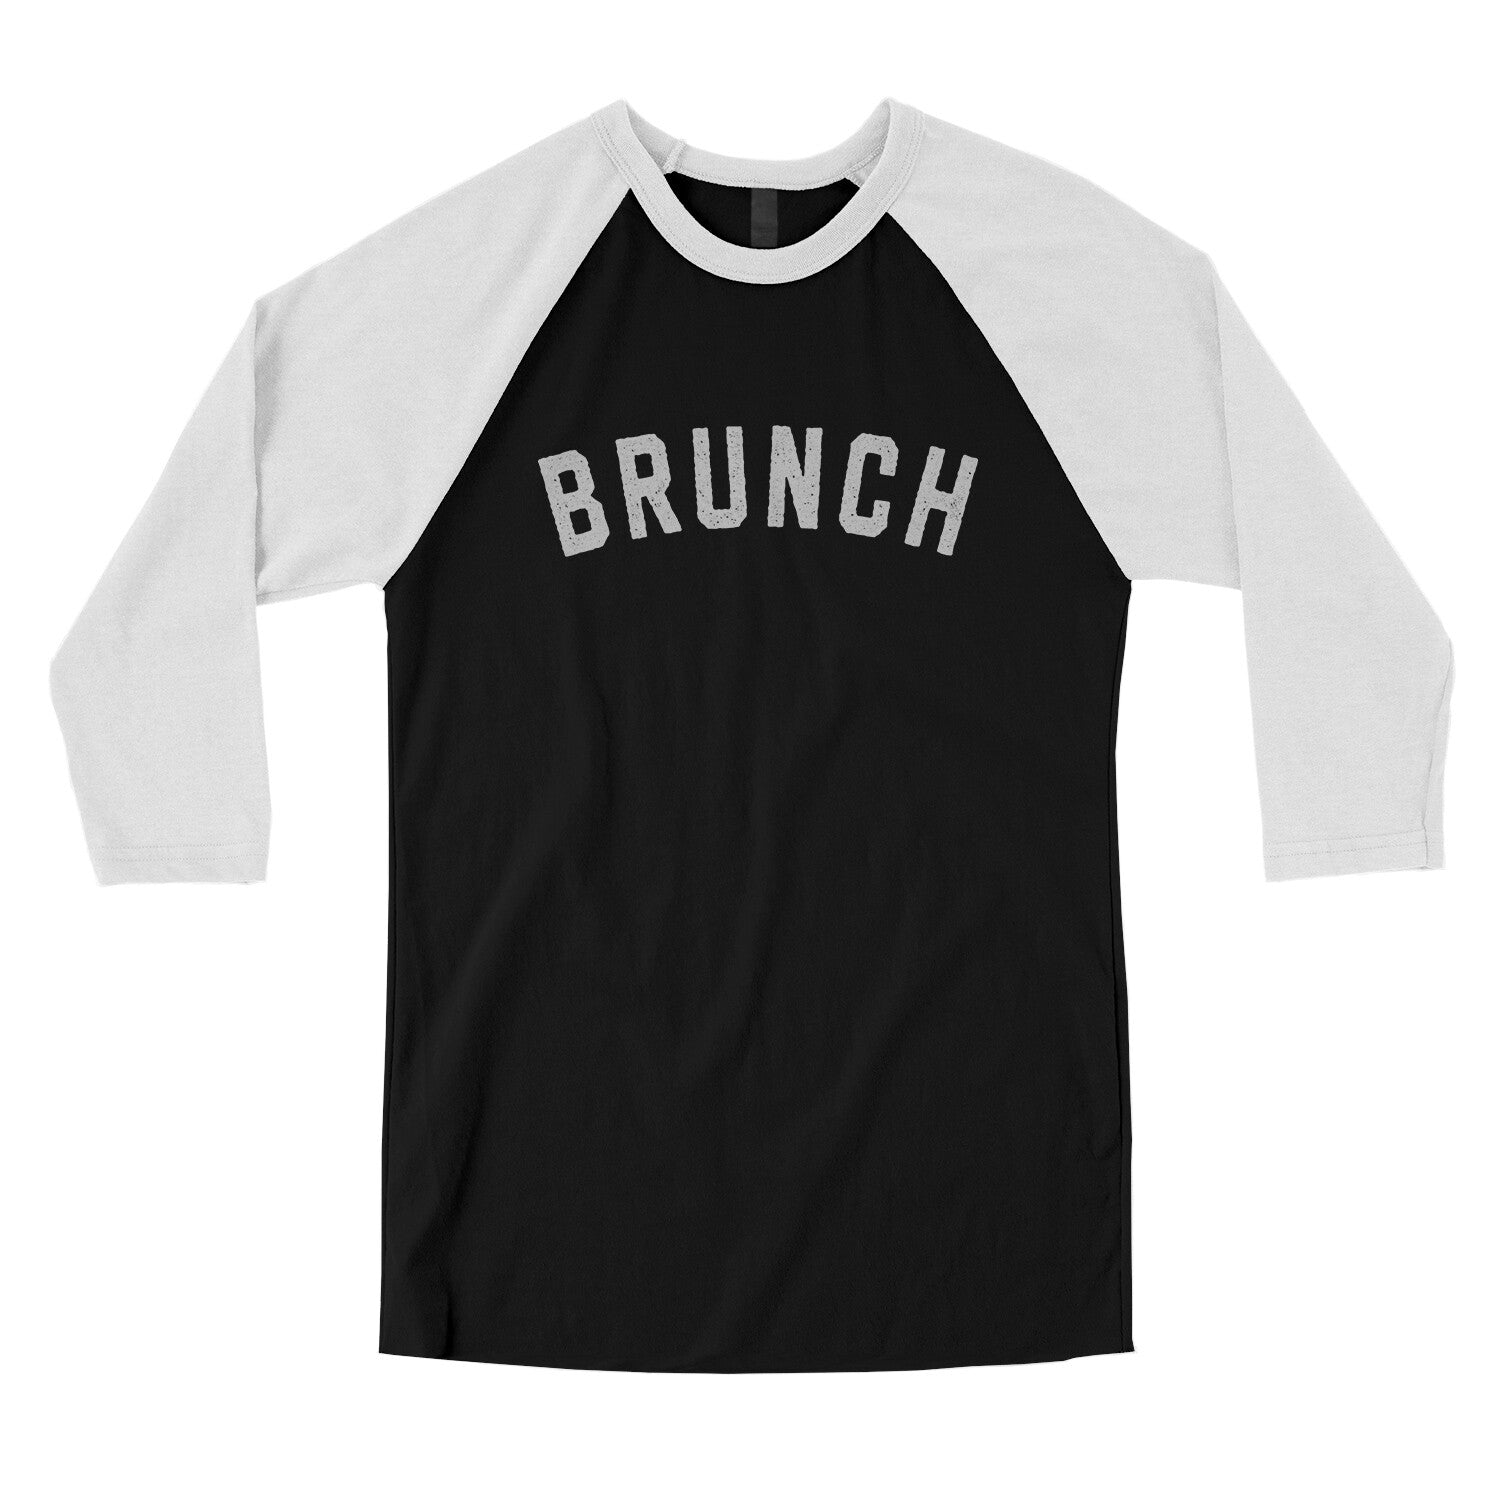 Brunch in Black with White Color